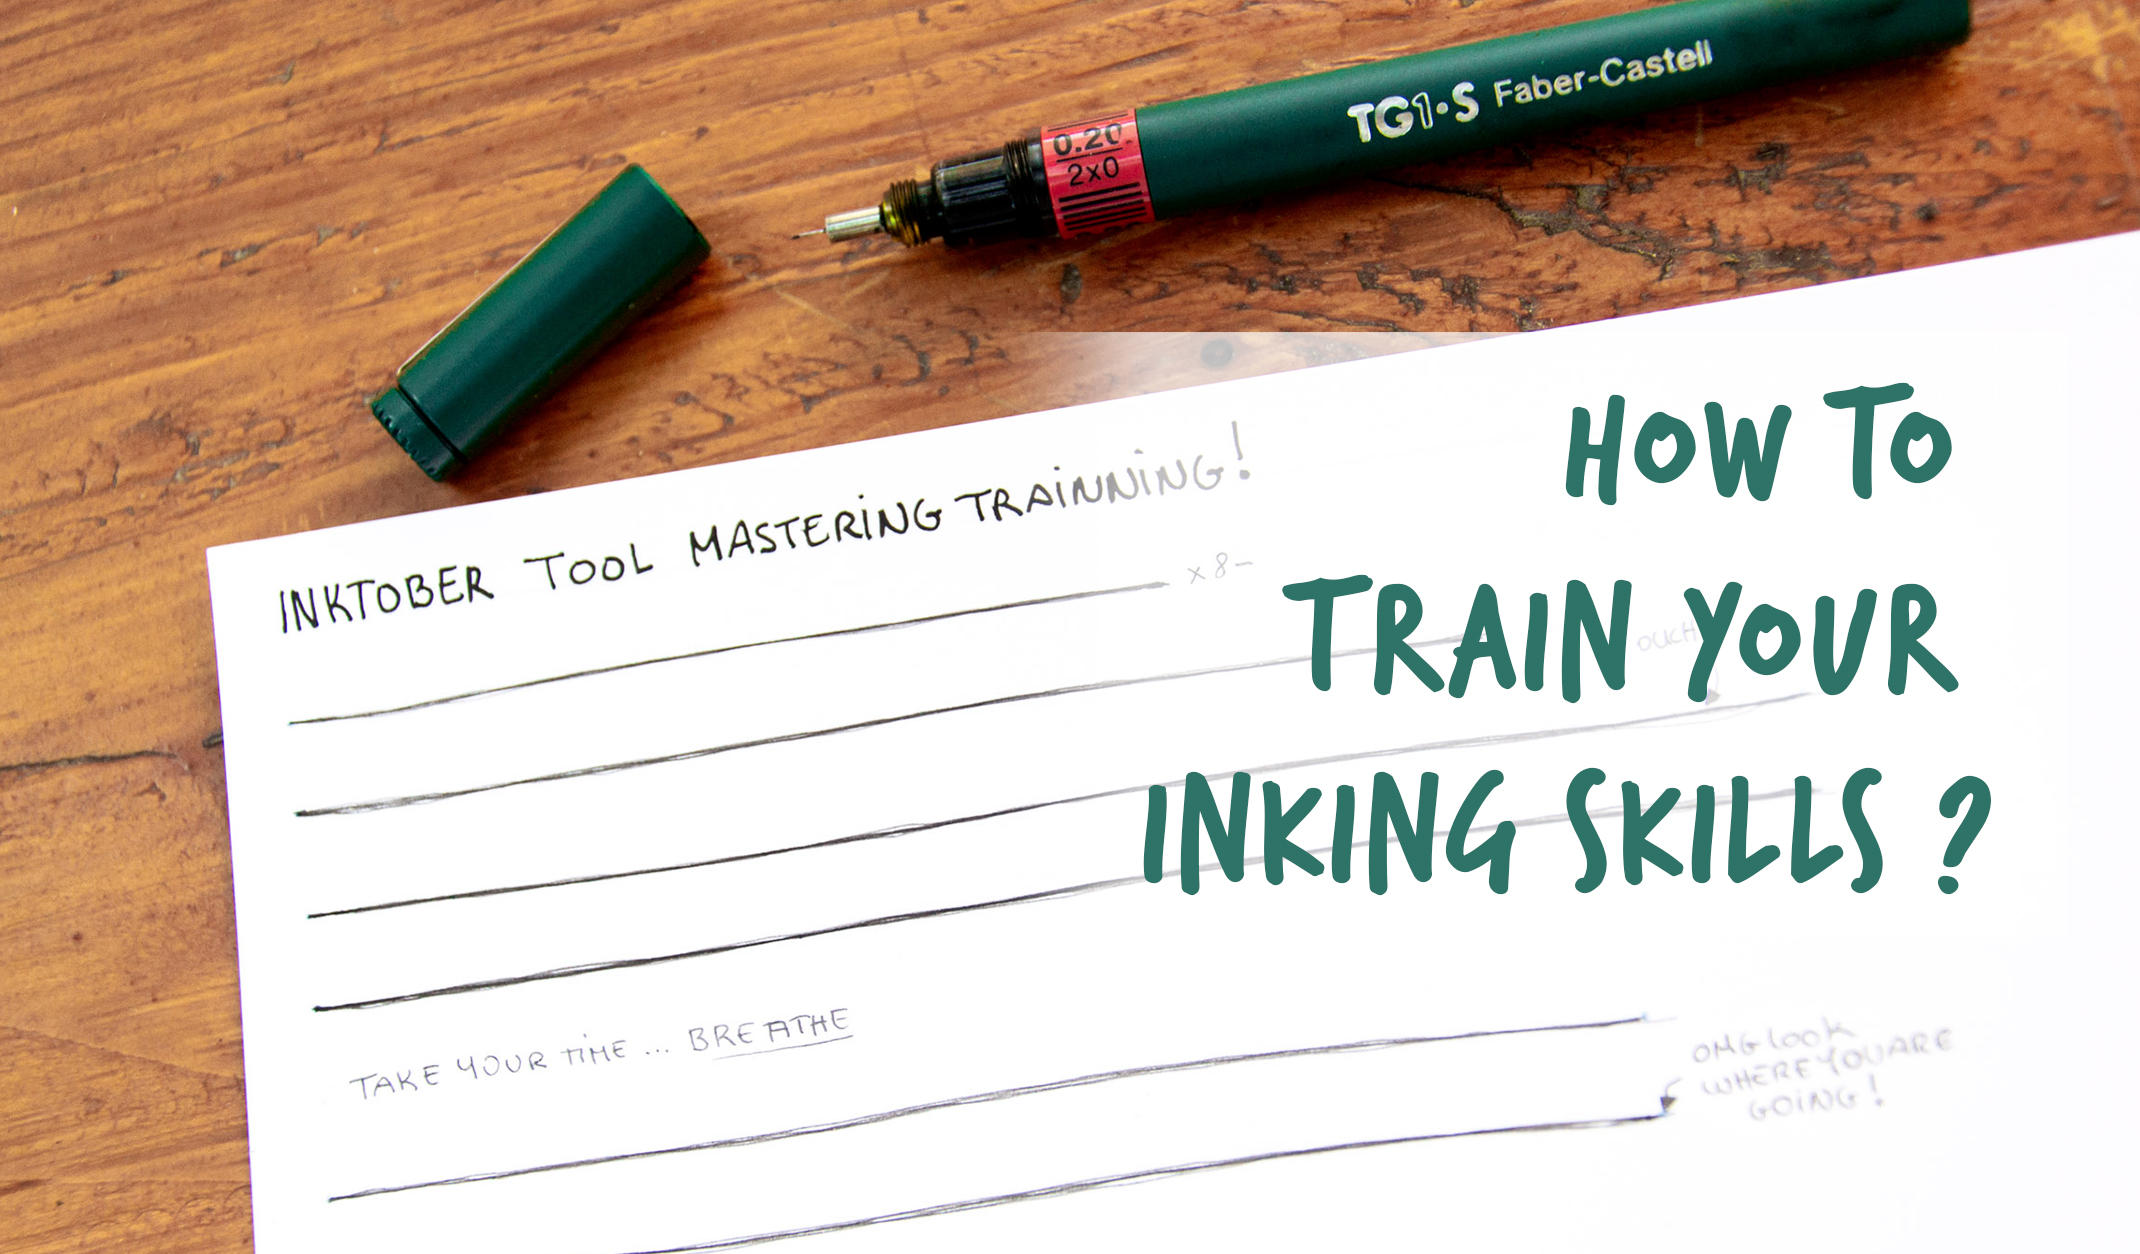 How to train your inking skills and get ready for Inktober ?